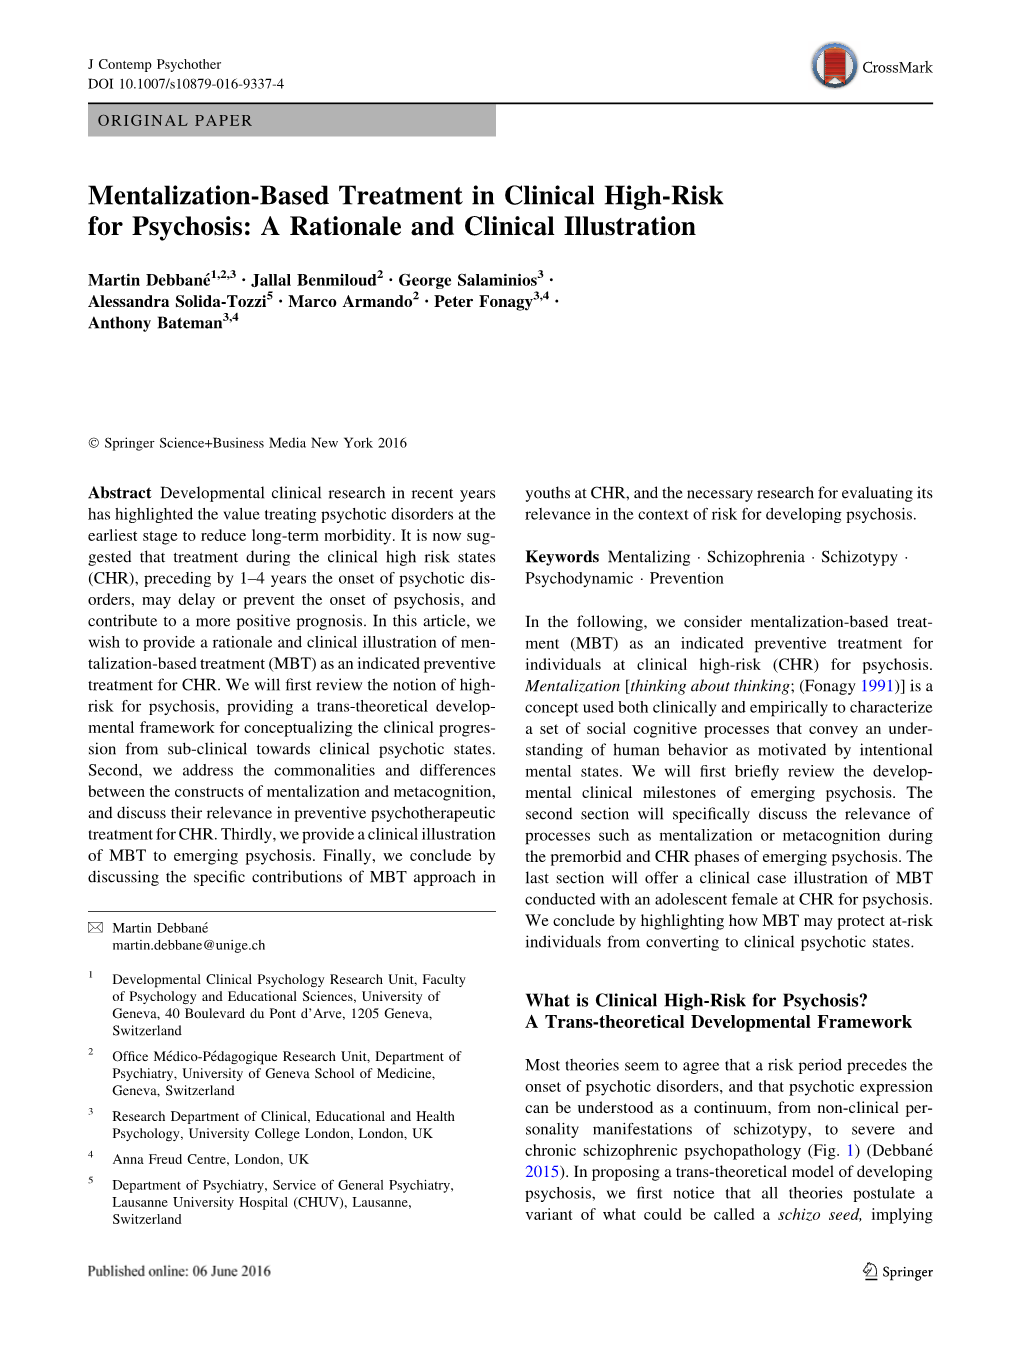 Mentalization-Based Treatment in Clinical High-Risk for Psychosis: a Rationale and Clinical Illustration